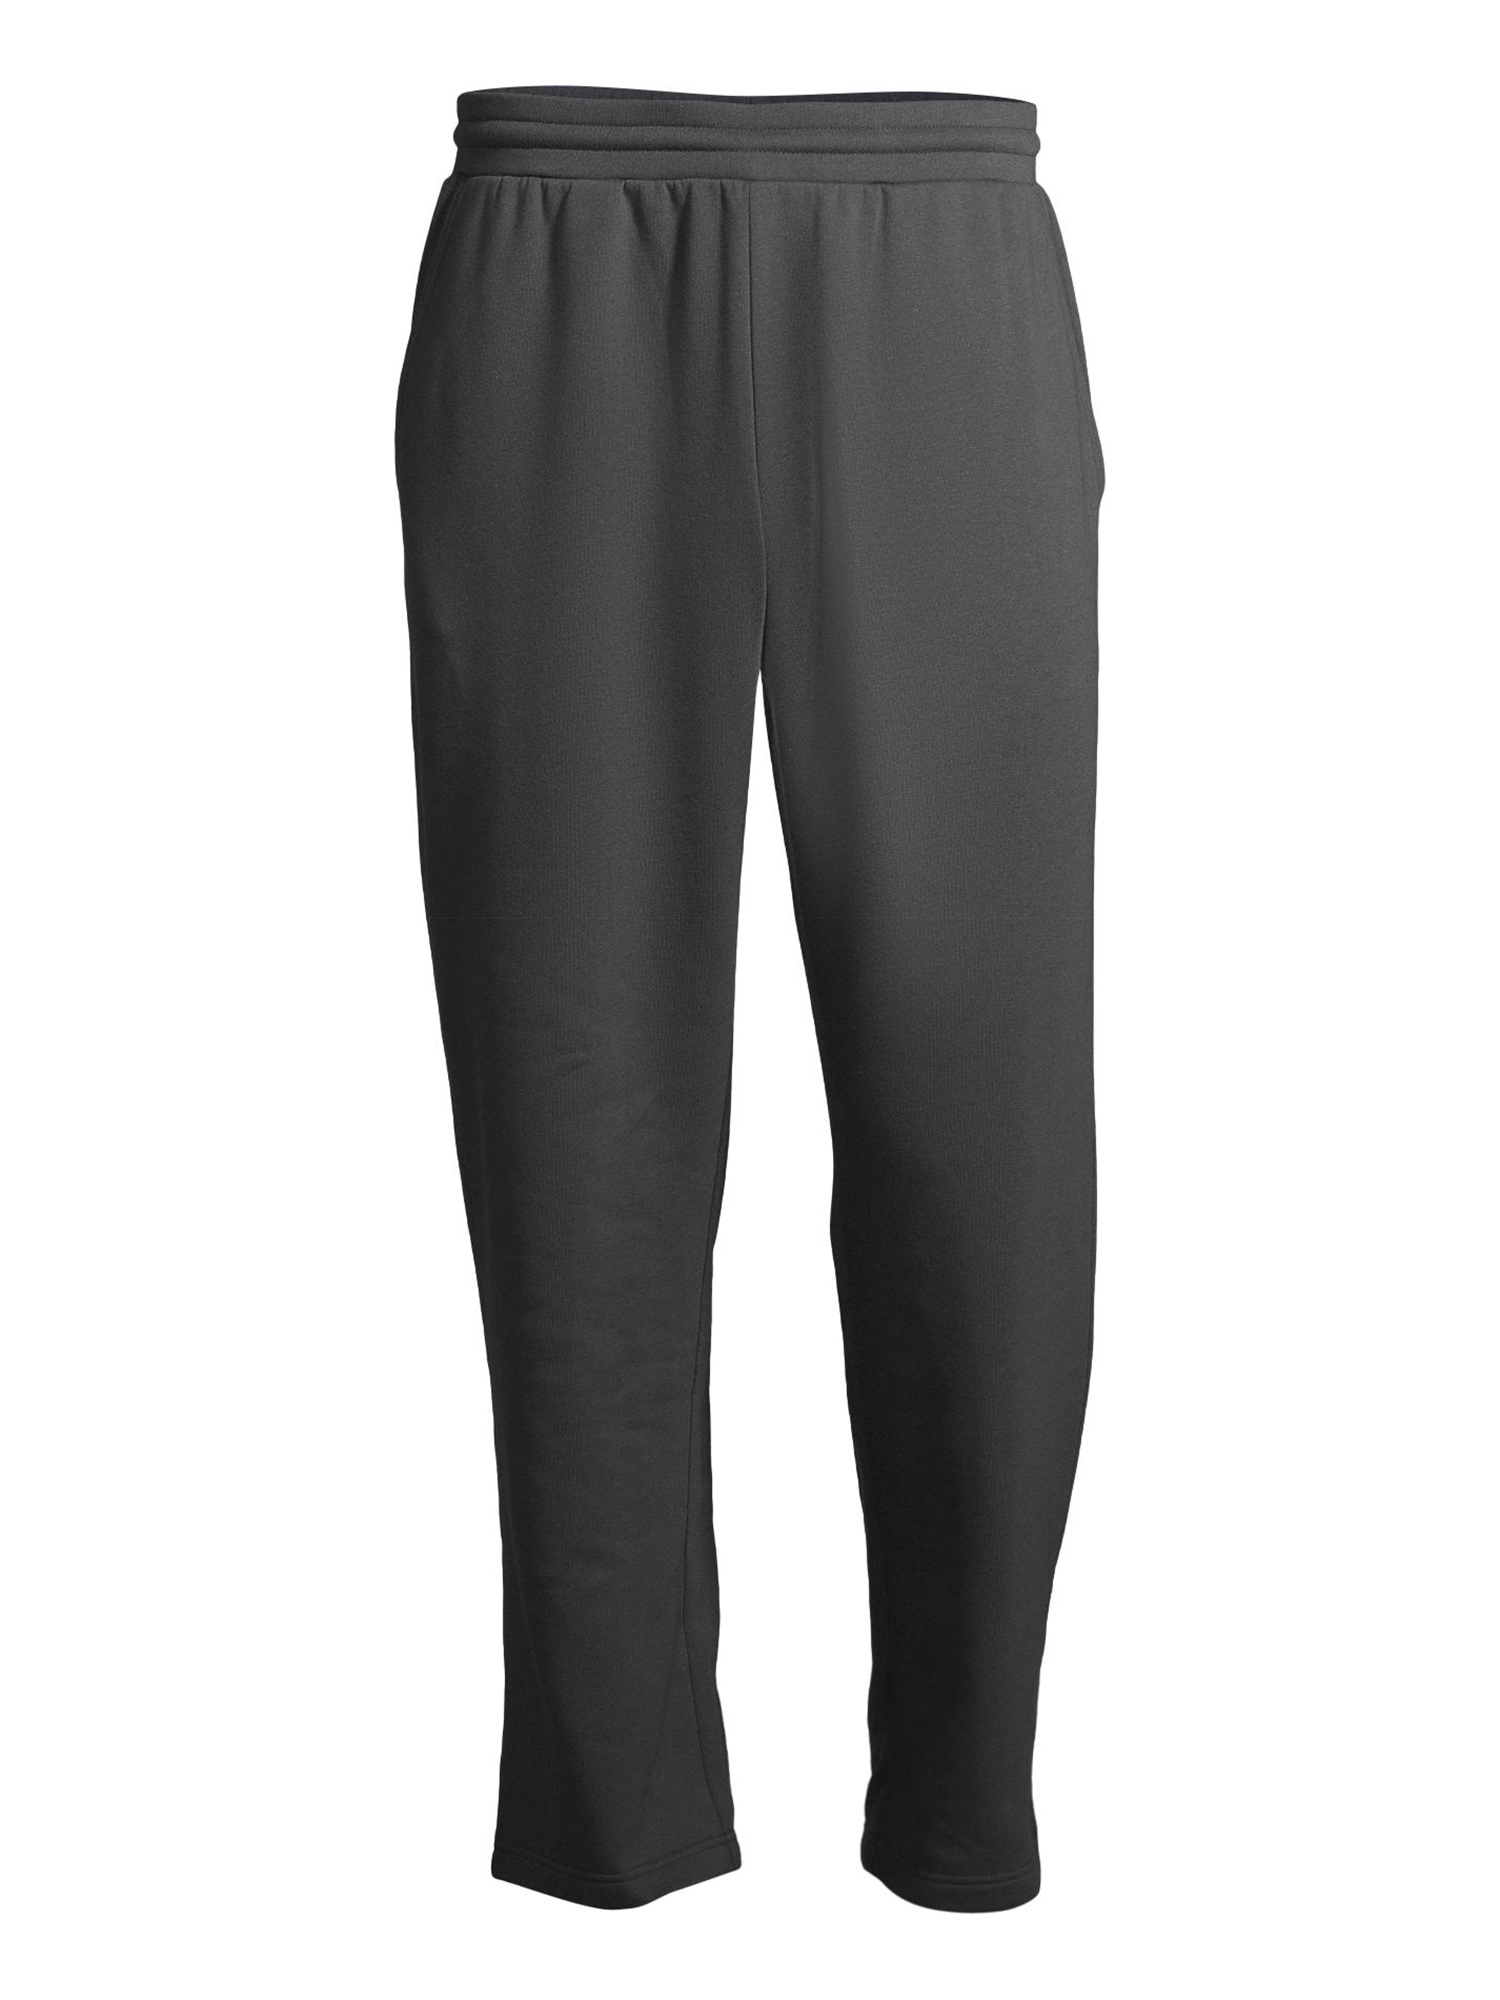 Athletic Works Men's Fleece Open Bottom Pants, up to Size 2XL - image 4 of 6